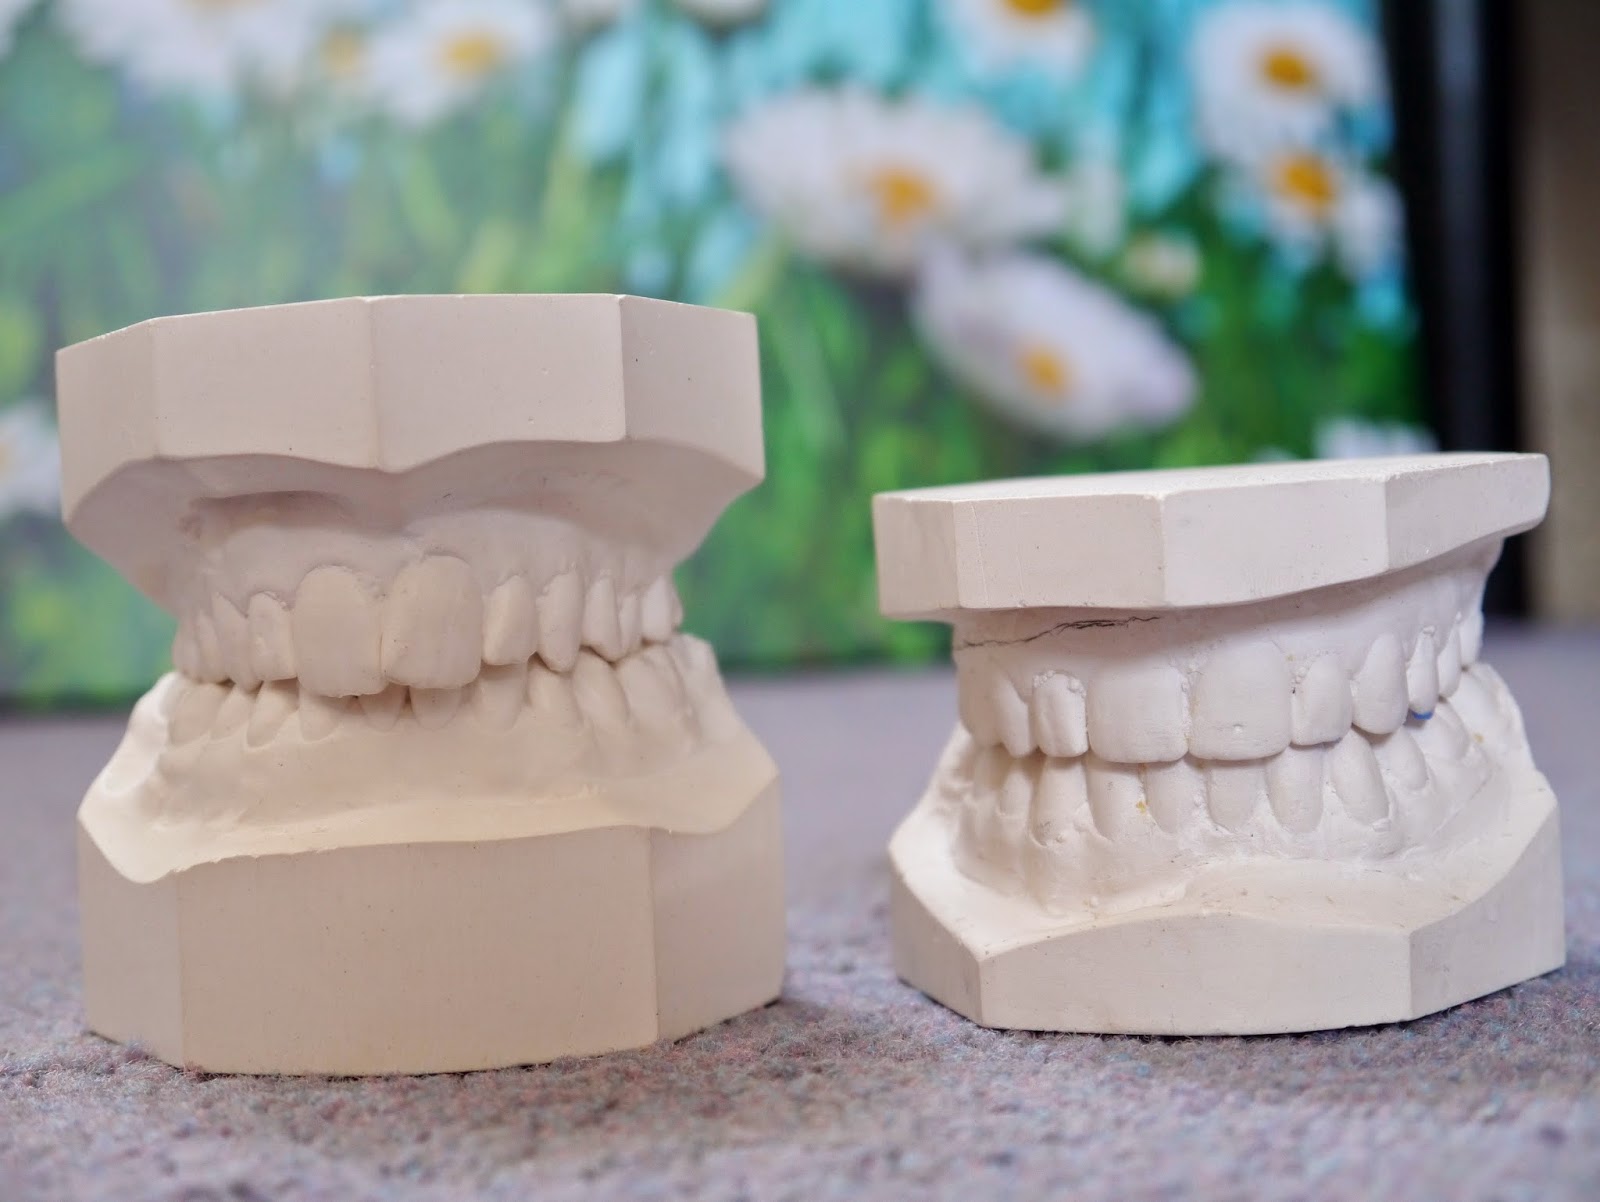 a photo of study models pre and post treatment